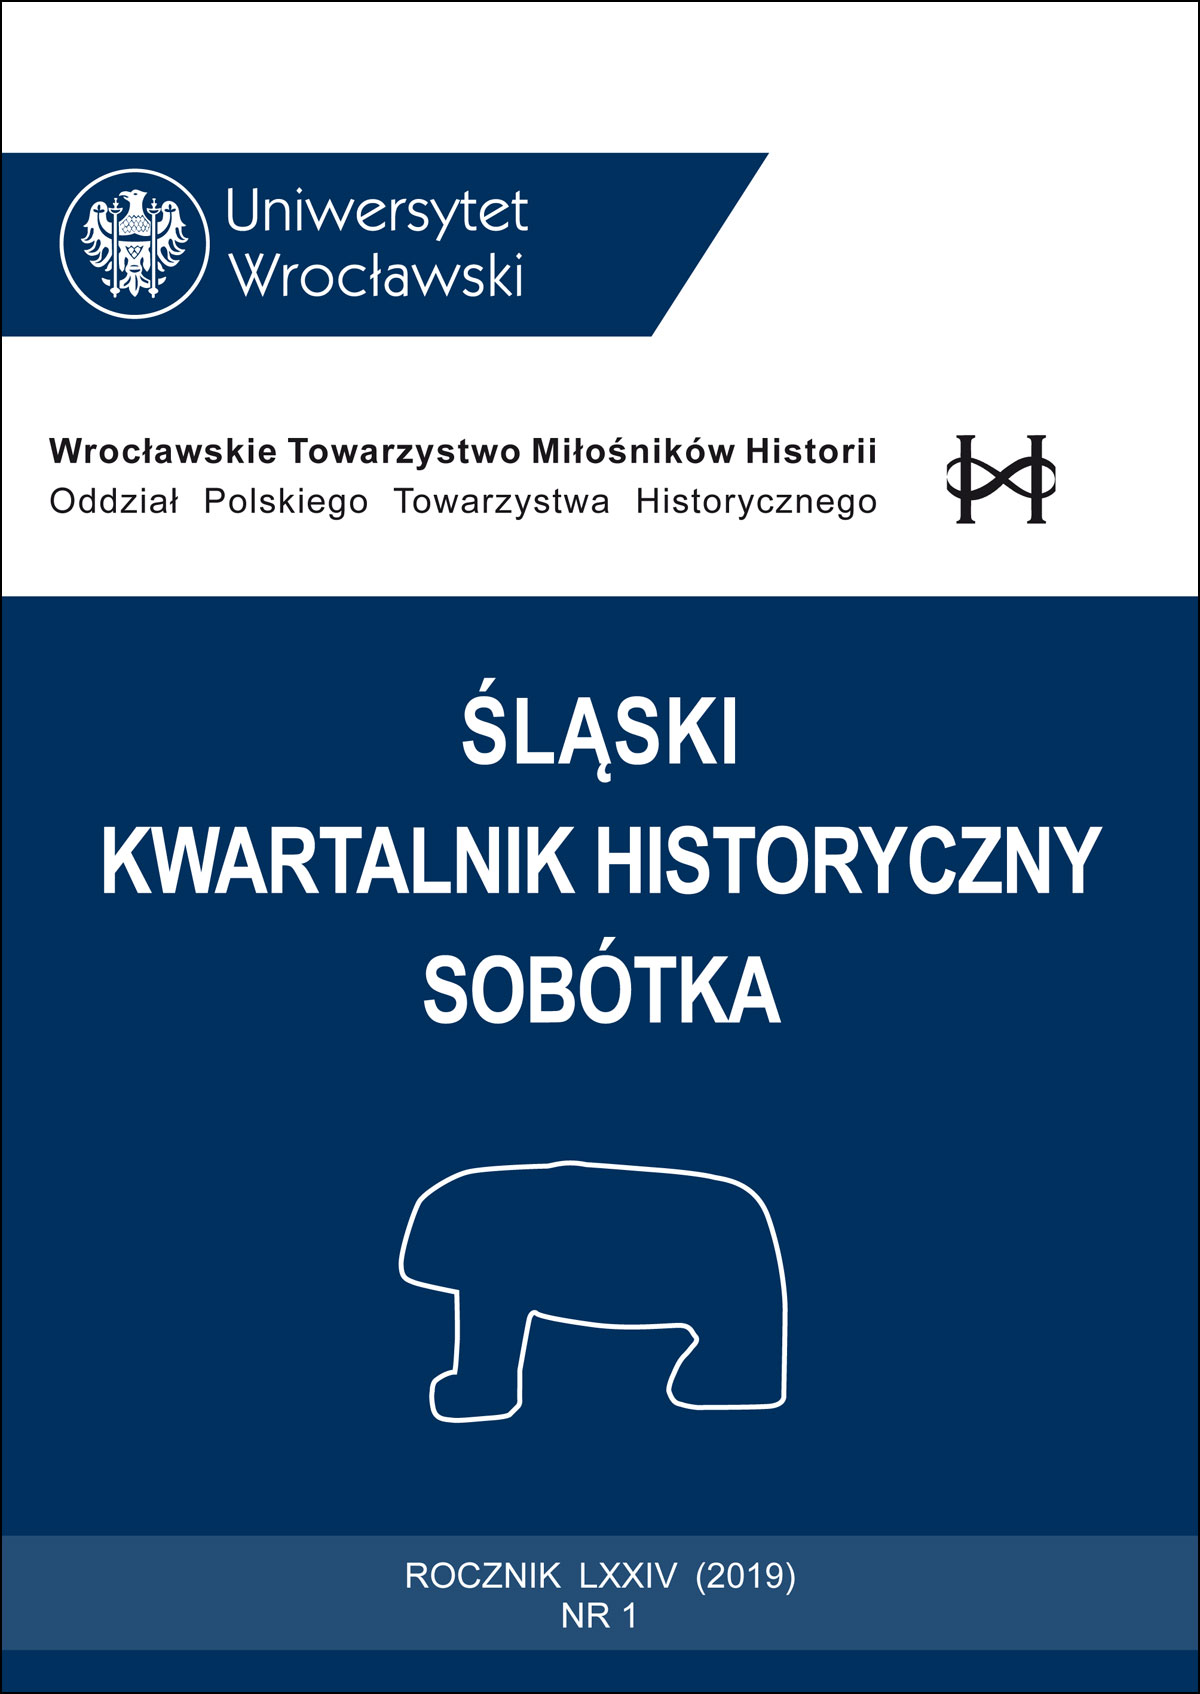 Material from the oldest city register books on history of pottery and Wzgórze Garncarskie [Potter Hill] in Zgorzelec in the 14th century Cover Image